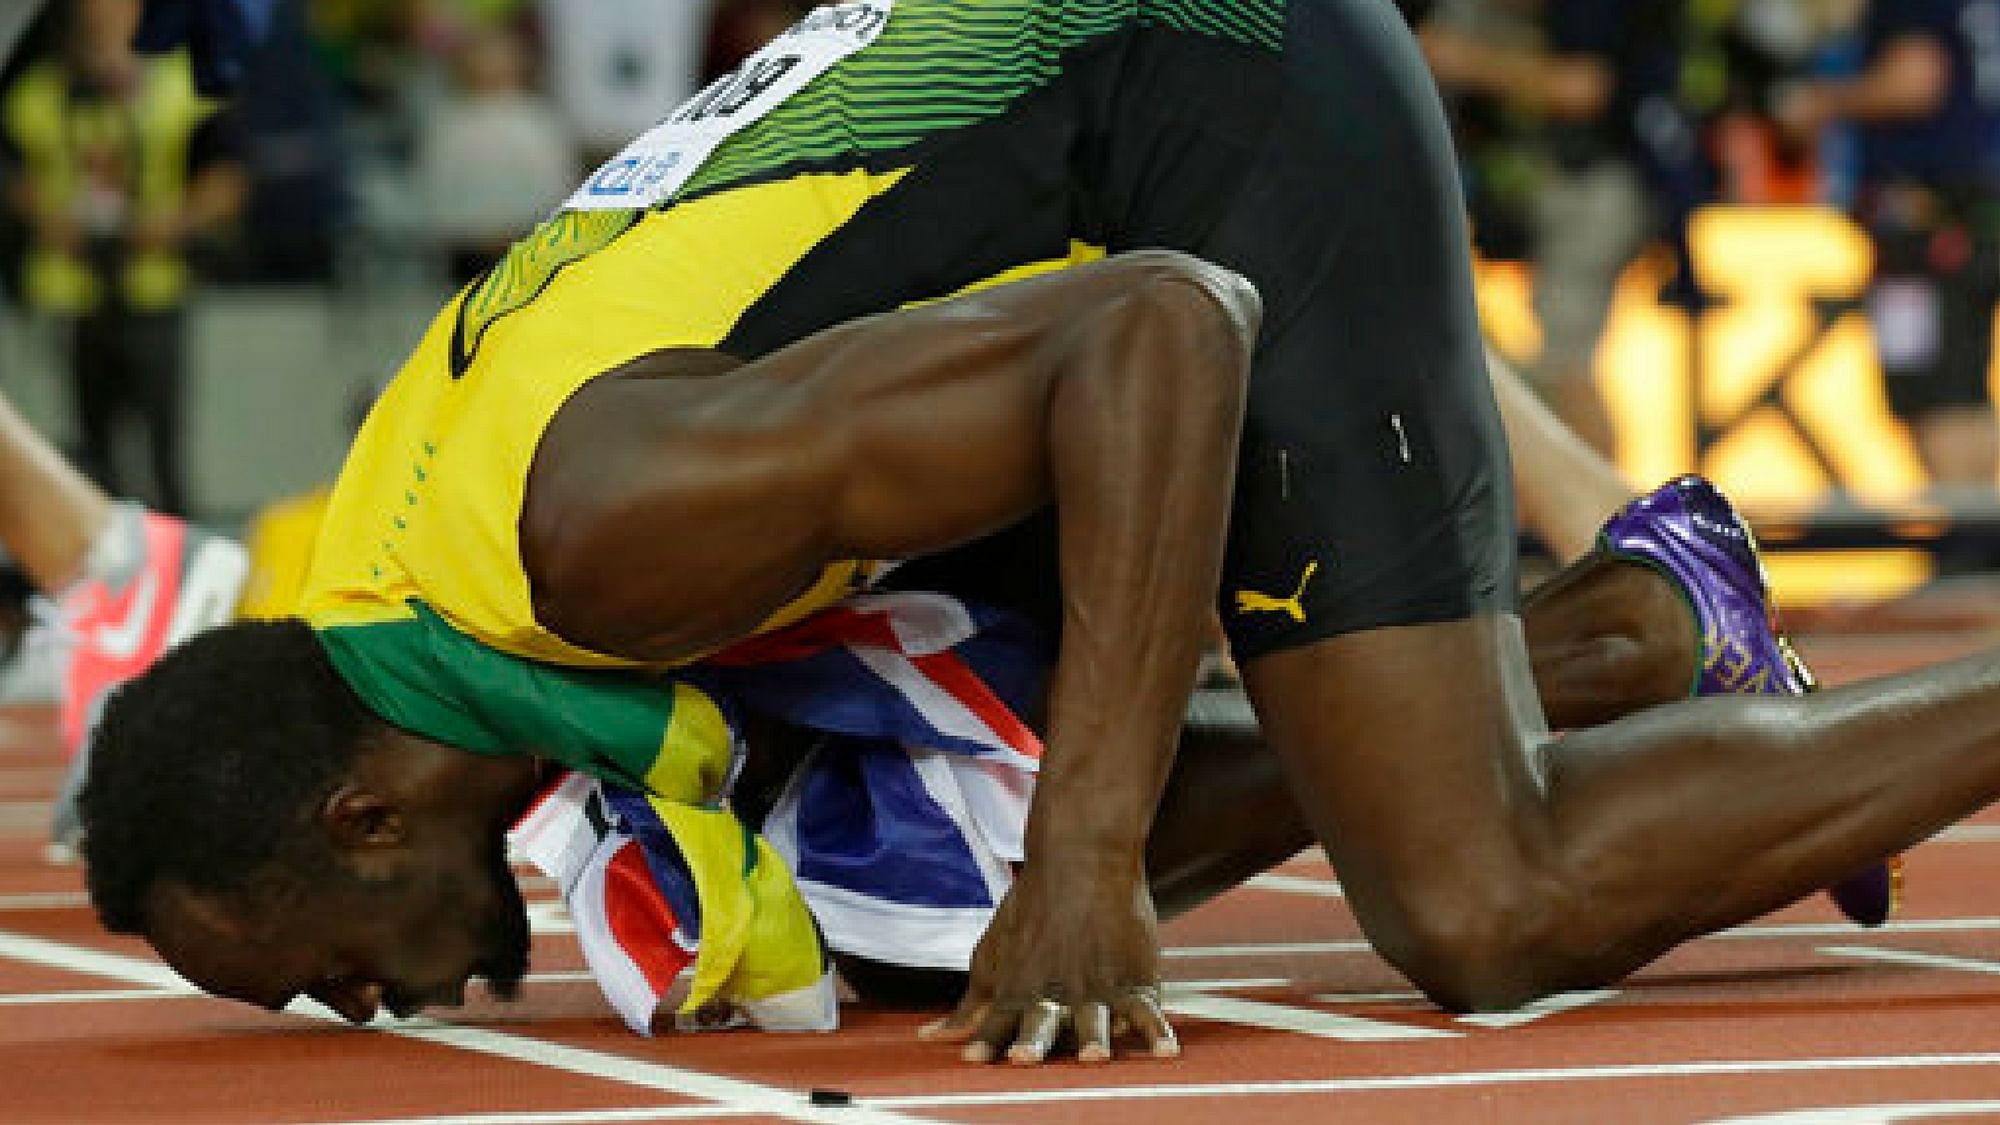  Jamaica’s Usain Bolt kisses the track after placing third in the men’s 100m final during the World Athletics Championships in London Saturday, Aug. 5, 2017.